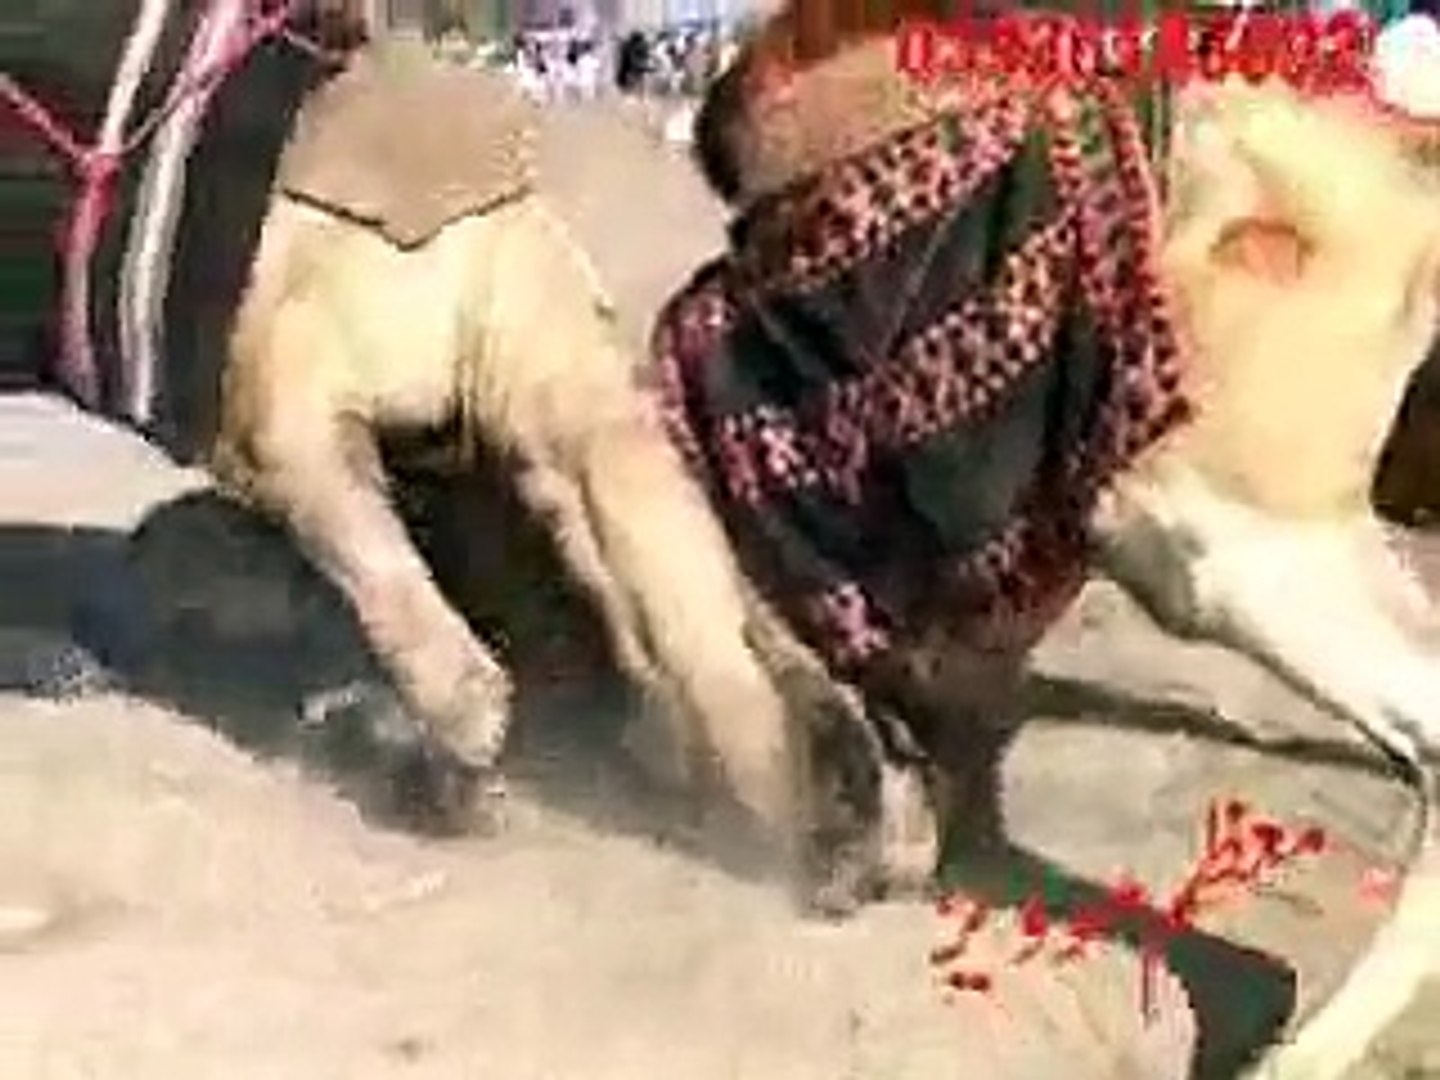 two camels are fighting